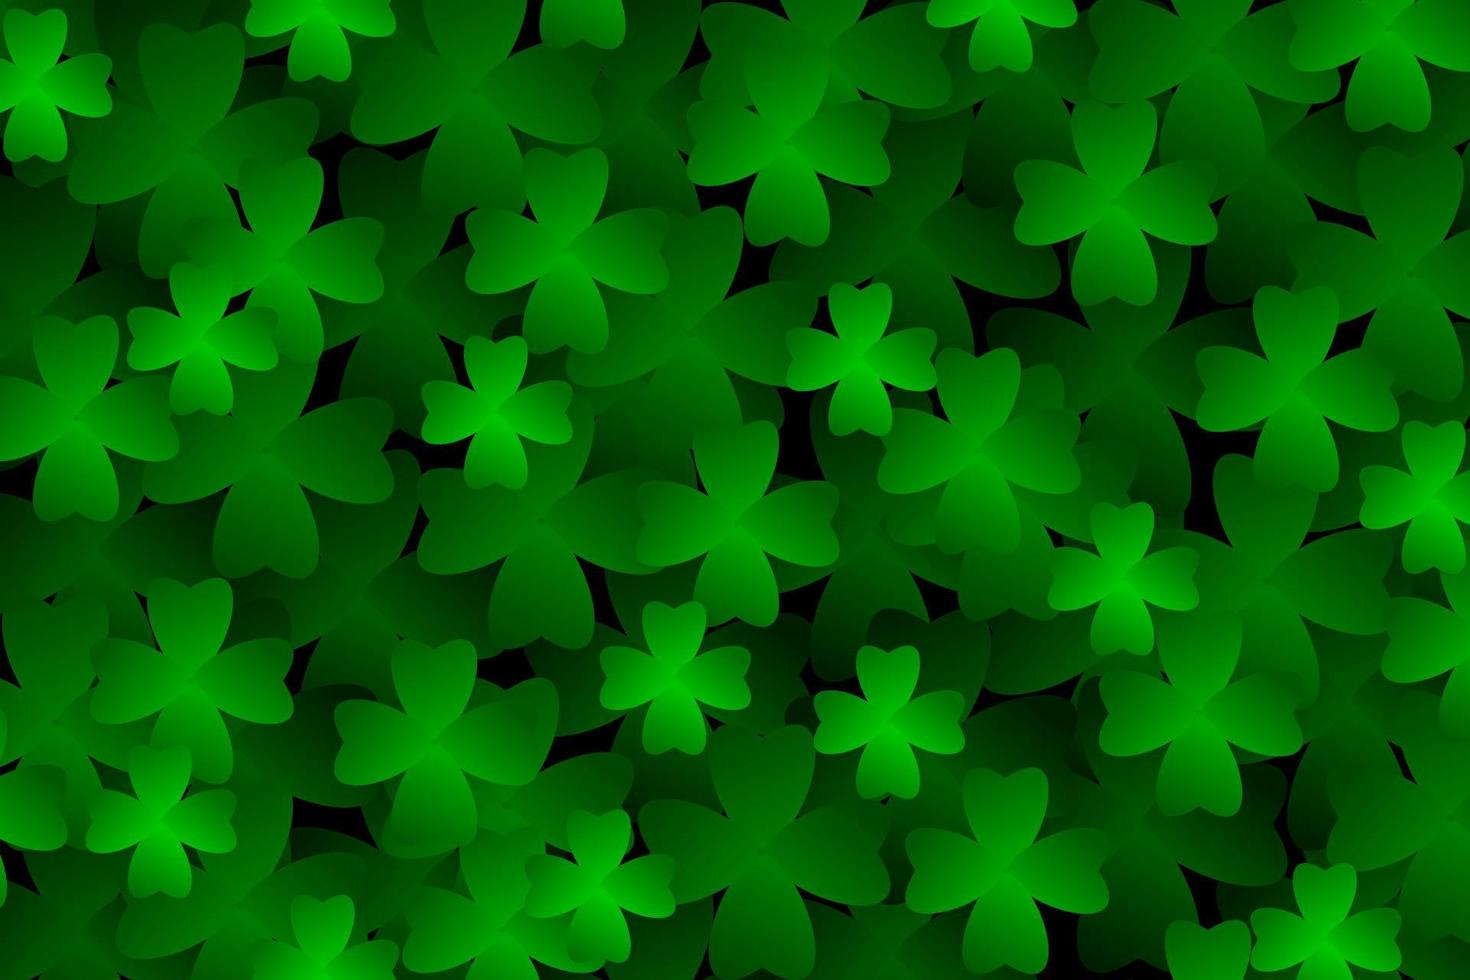 Clover leaves background. Suitable for Saint Patrick's Day, nature concept, and other vector